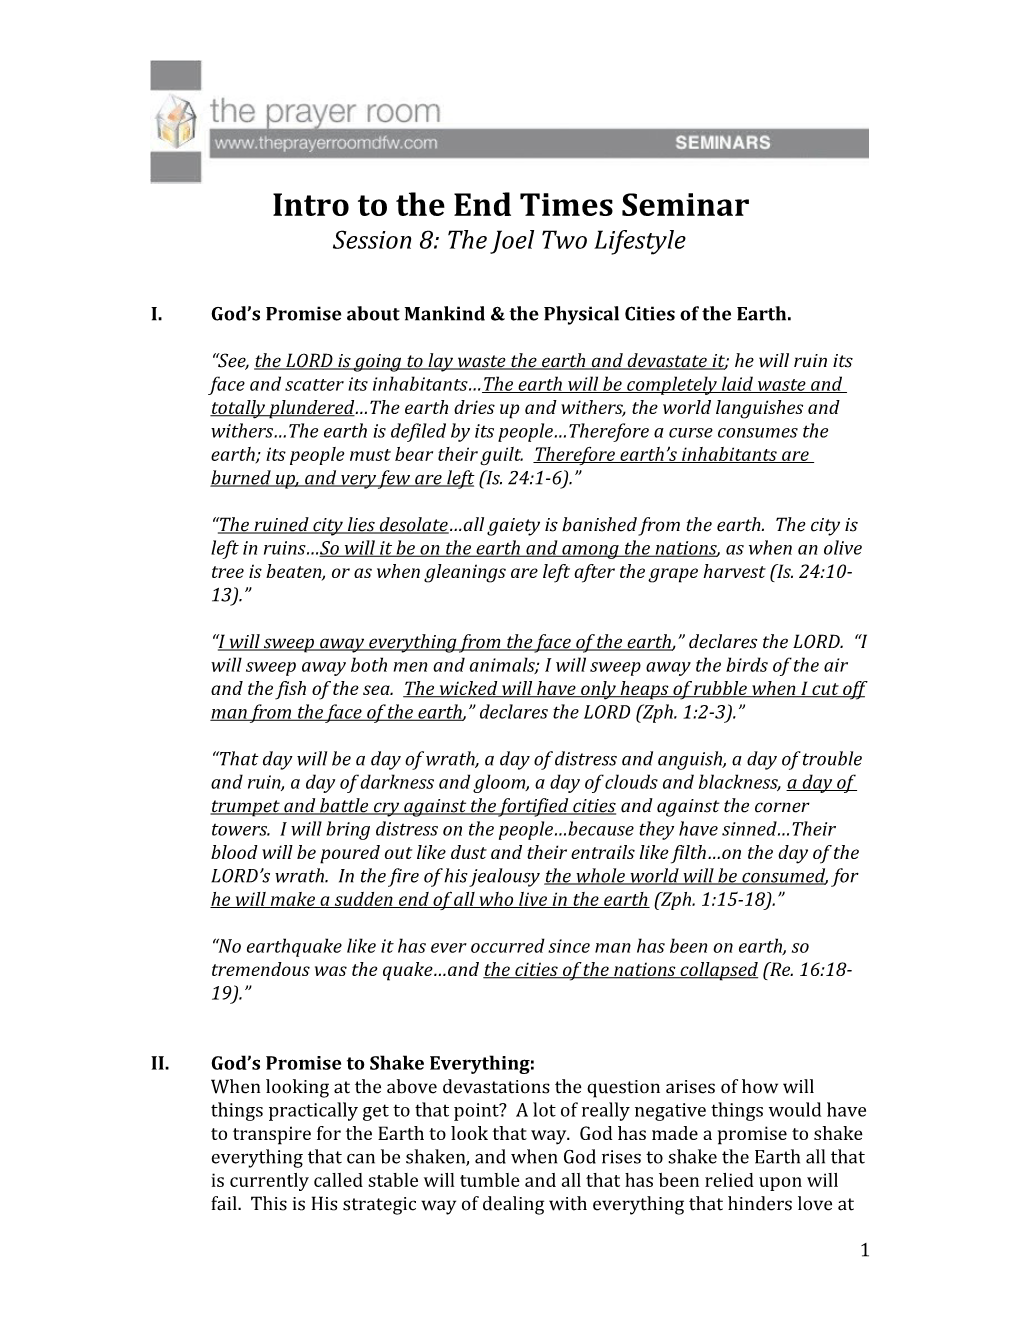 Intro to the End Times Seminar